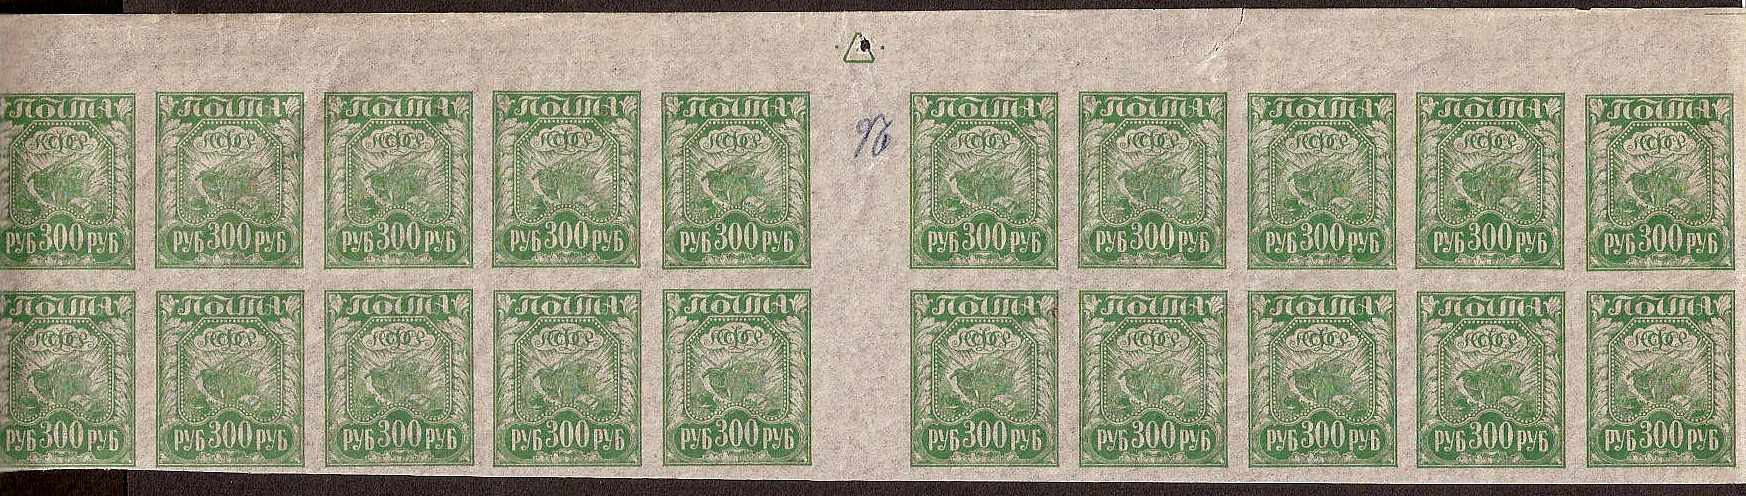 Russia Specialized - Soviet Republic 1921 First definitive issue Scott 184a 